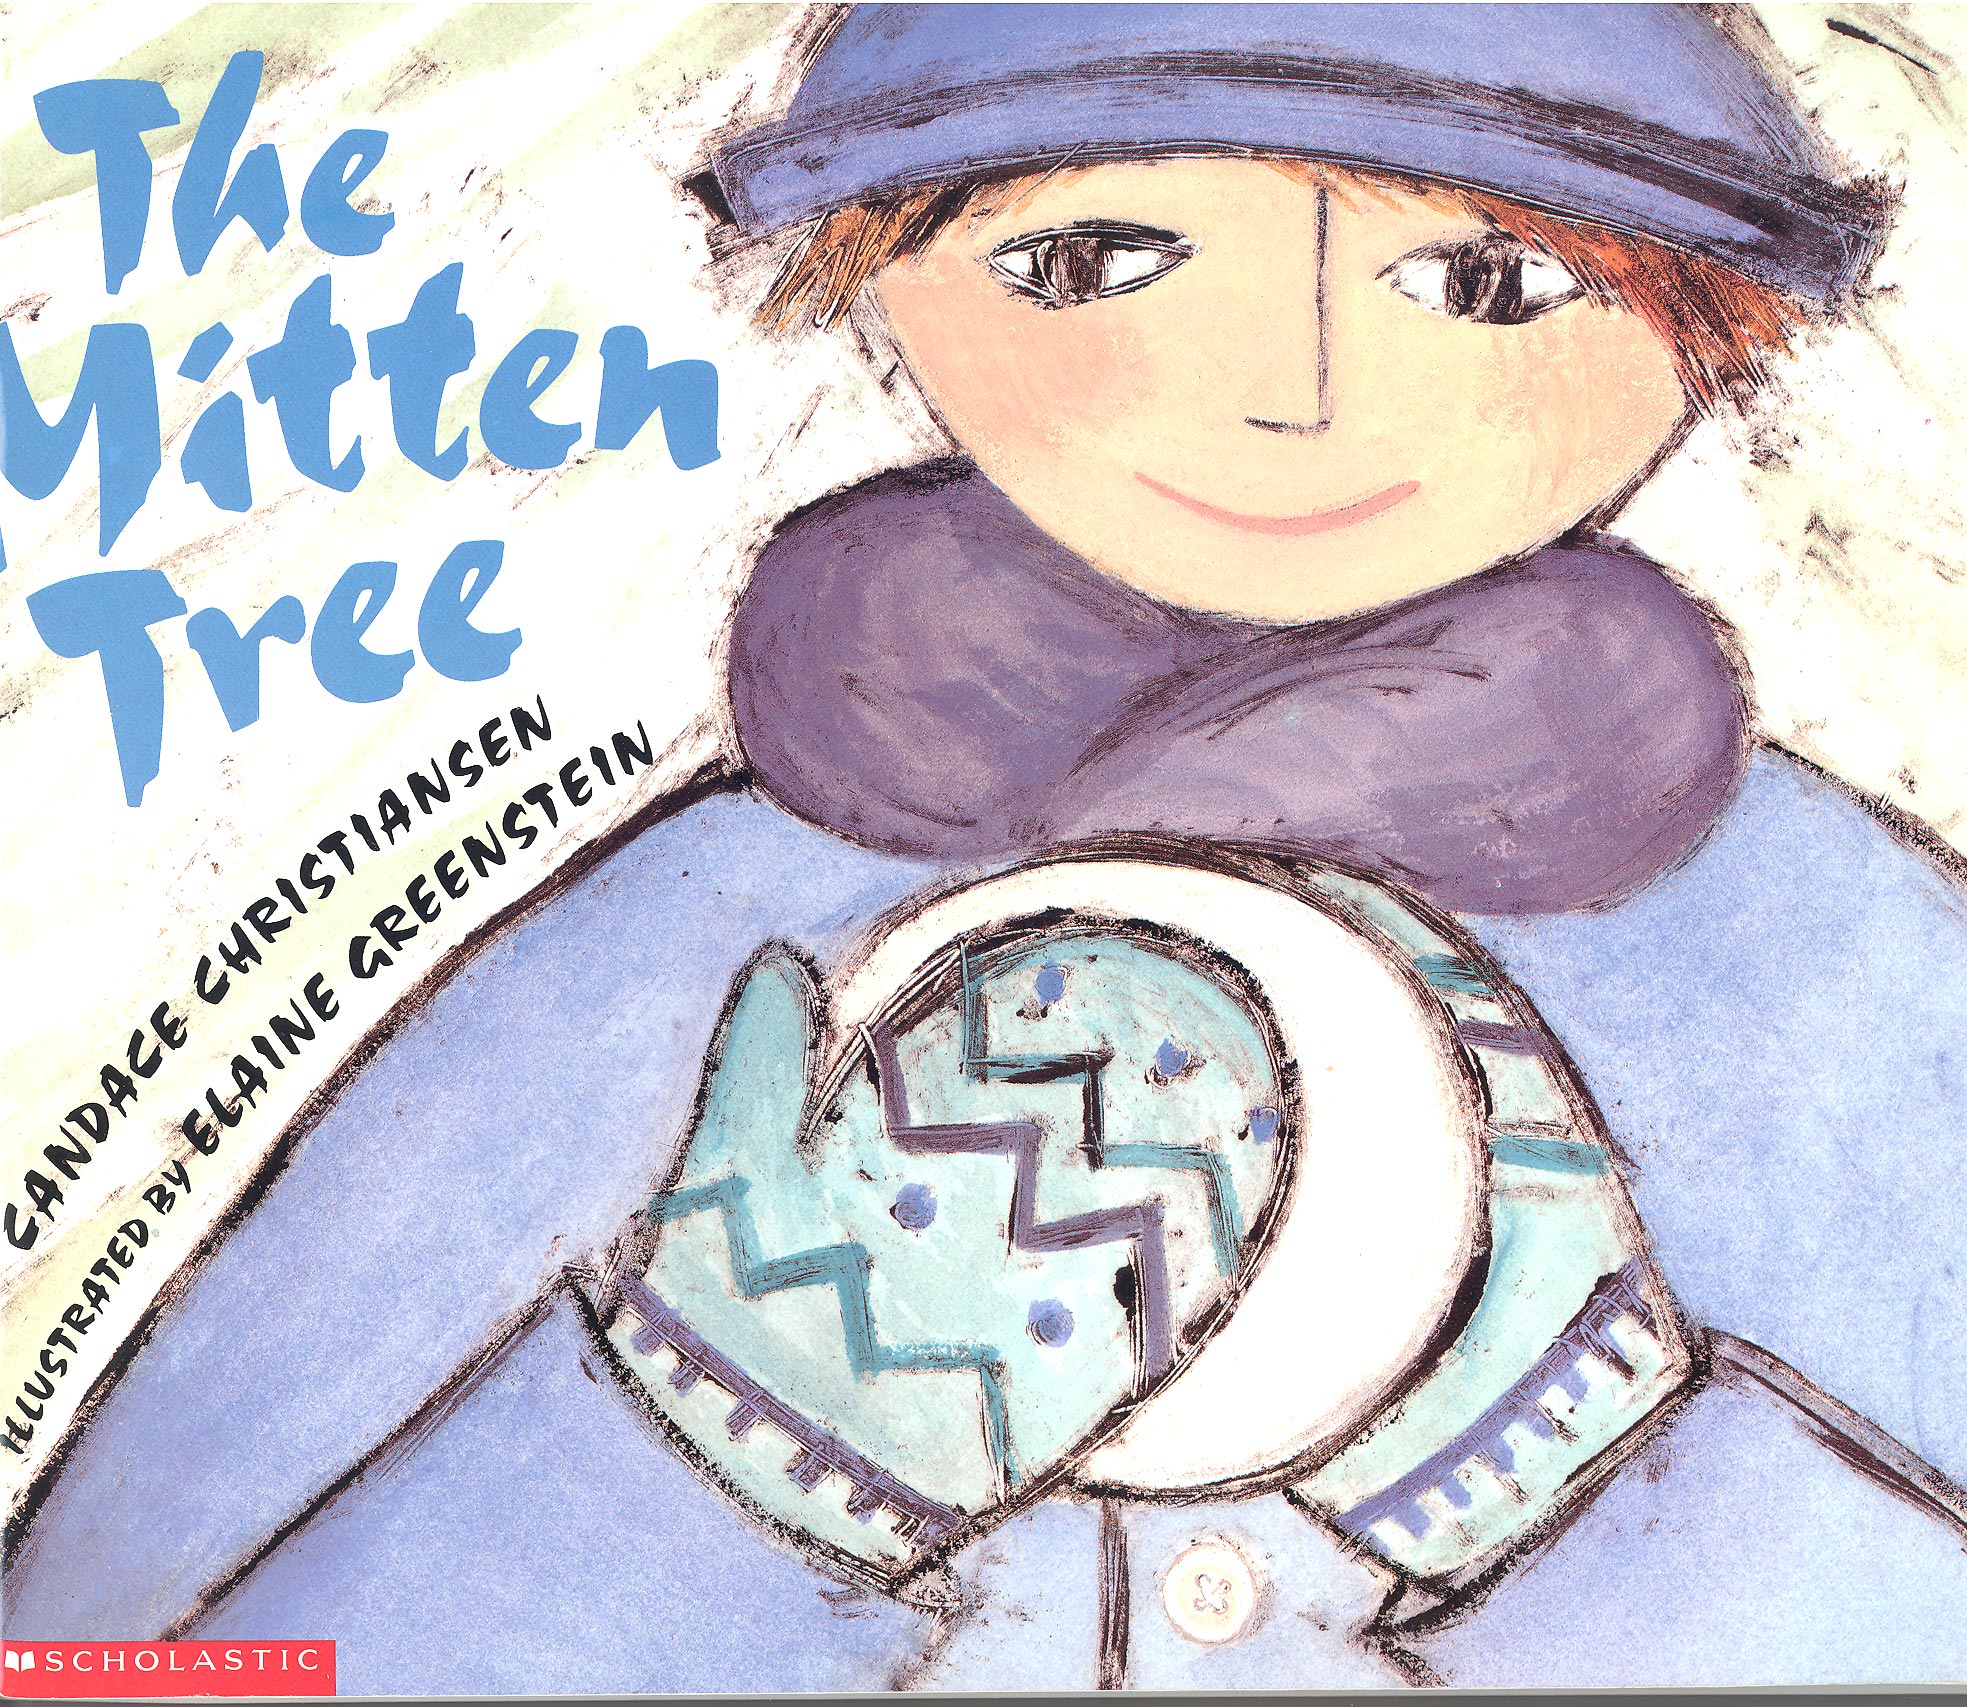 The mitten tree / Candace Christiansen ; illustrated by Elaine Greenstein.